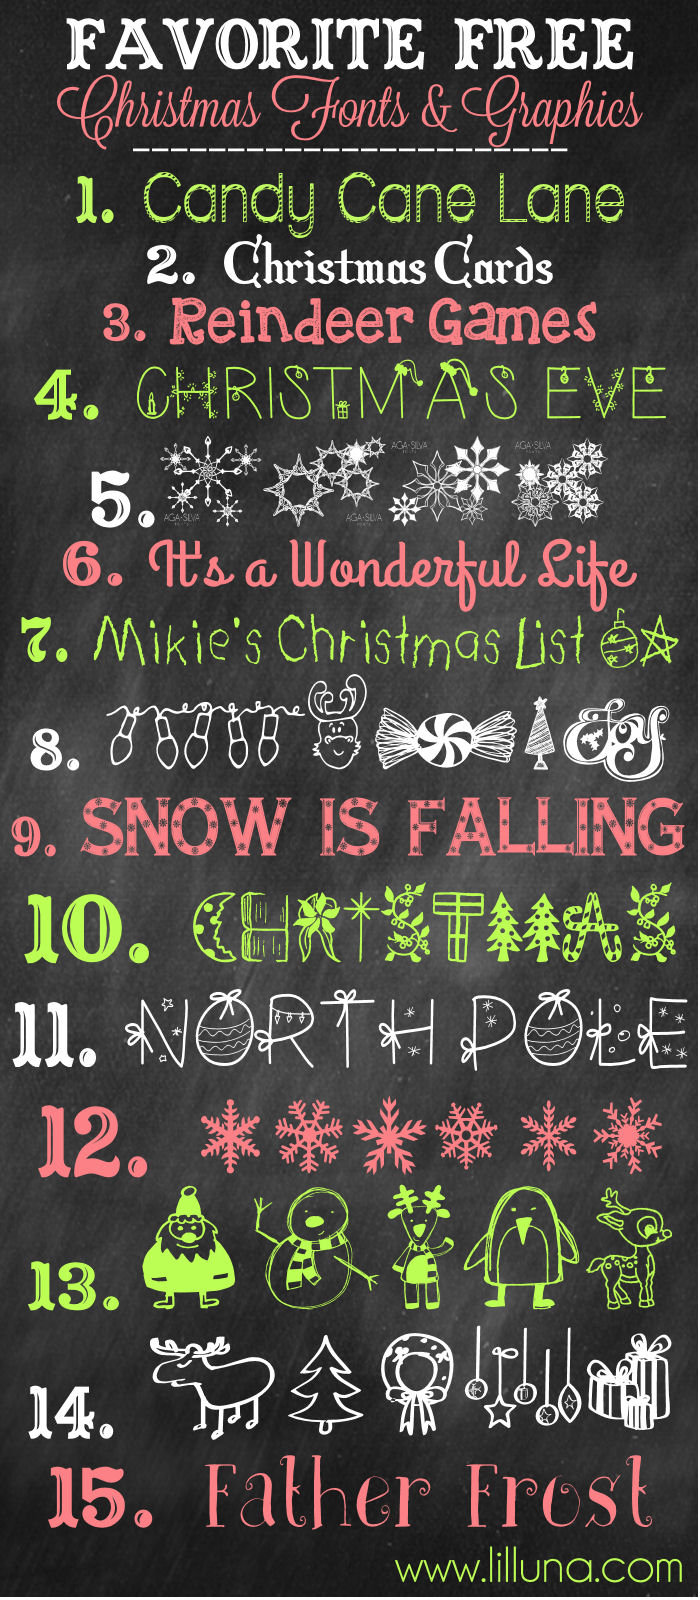 Favorite Free Christmas Fonts and Graphics to download and use { lilluna.com }